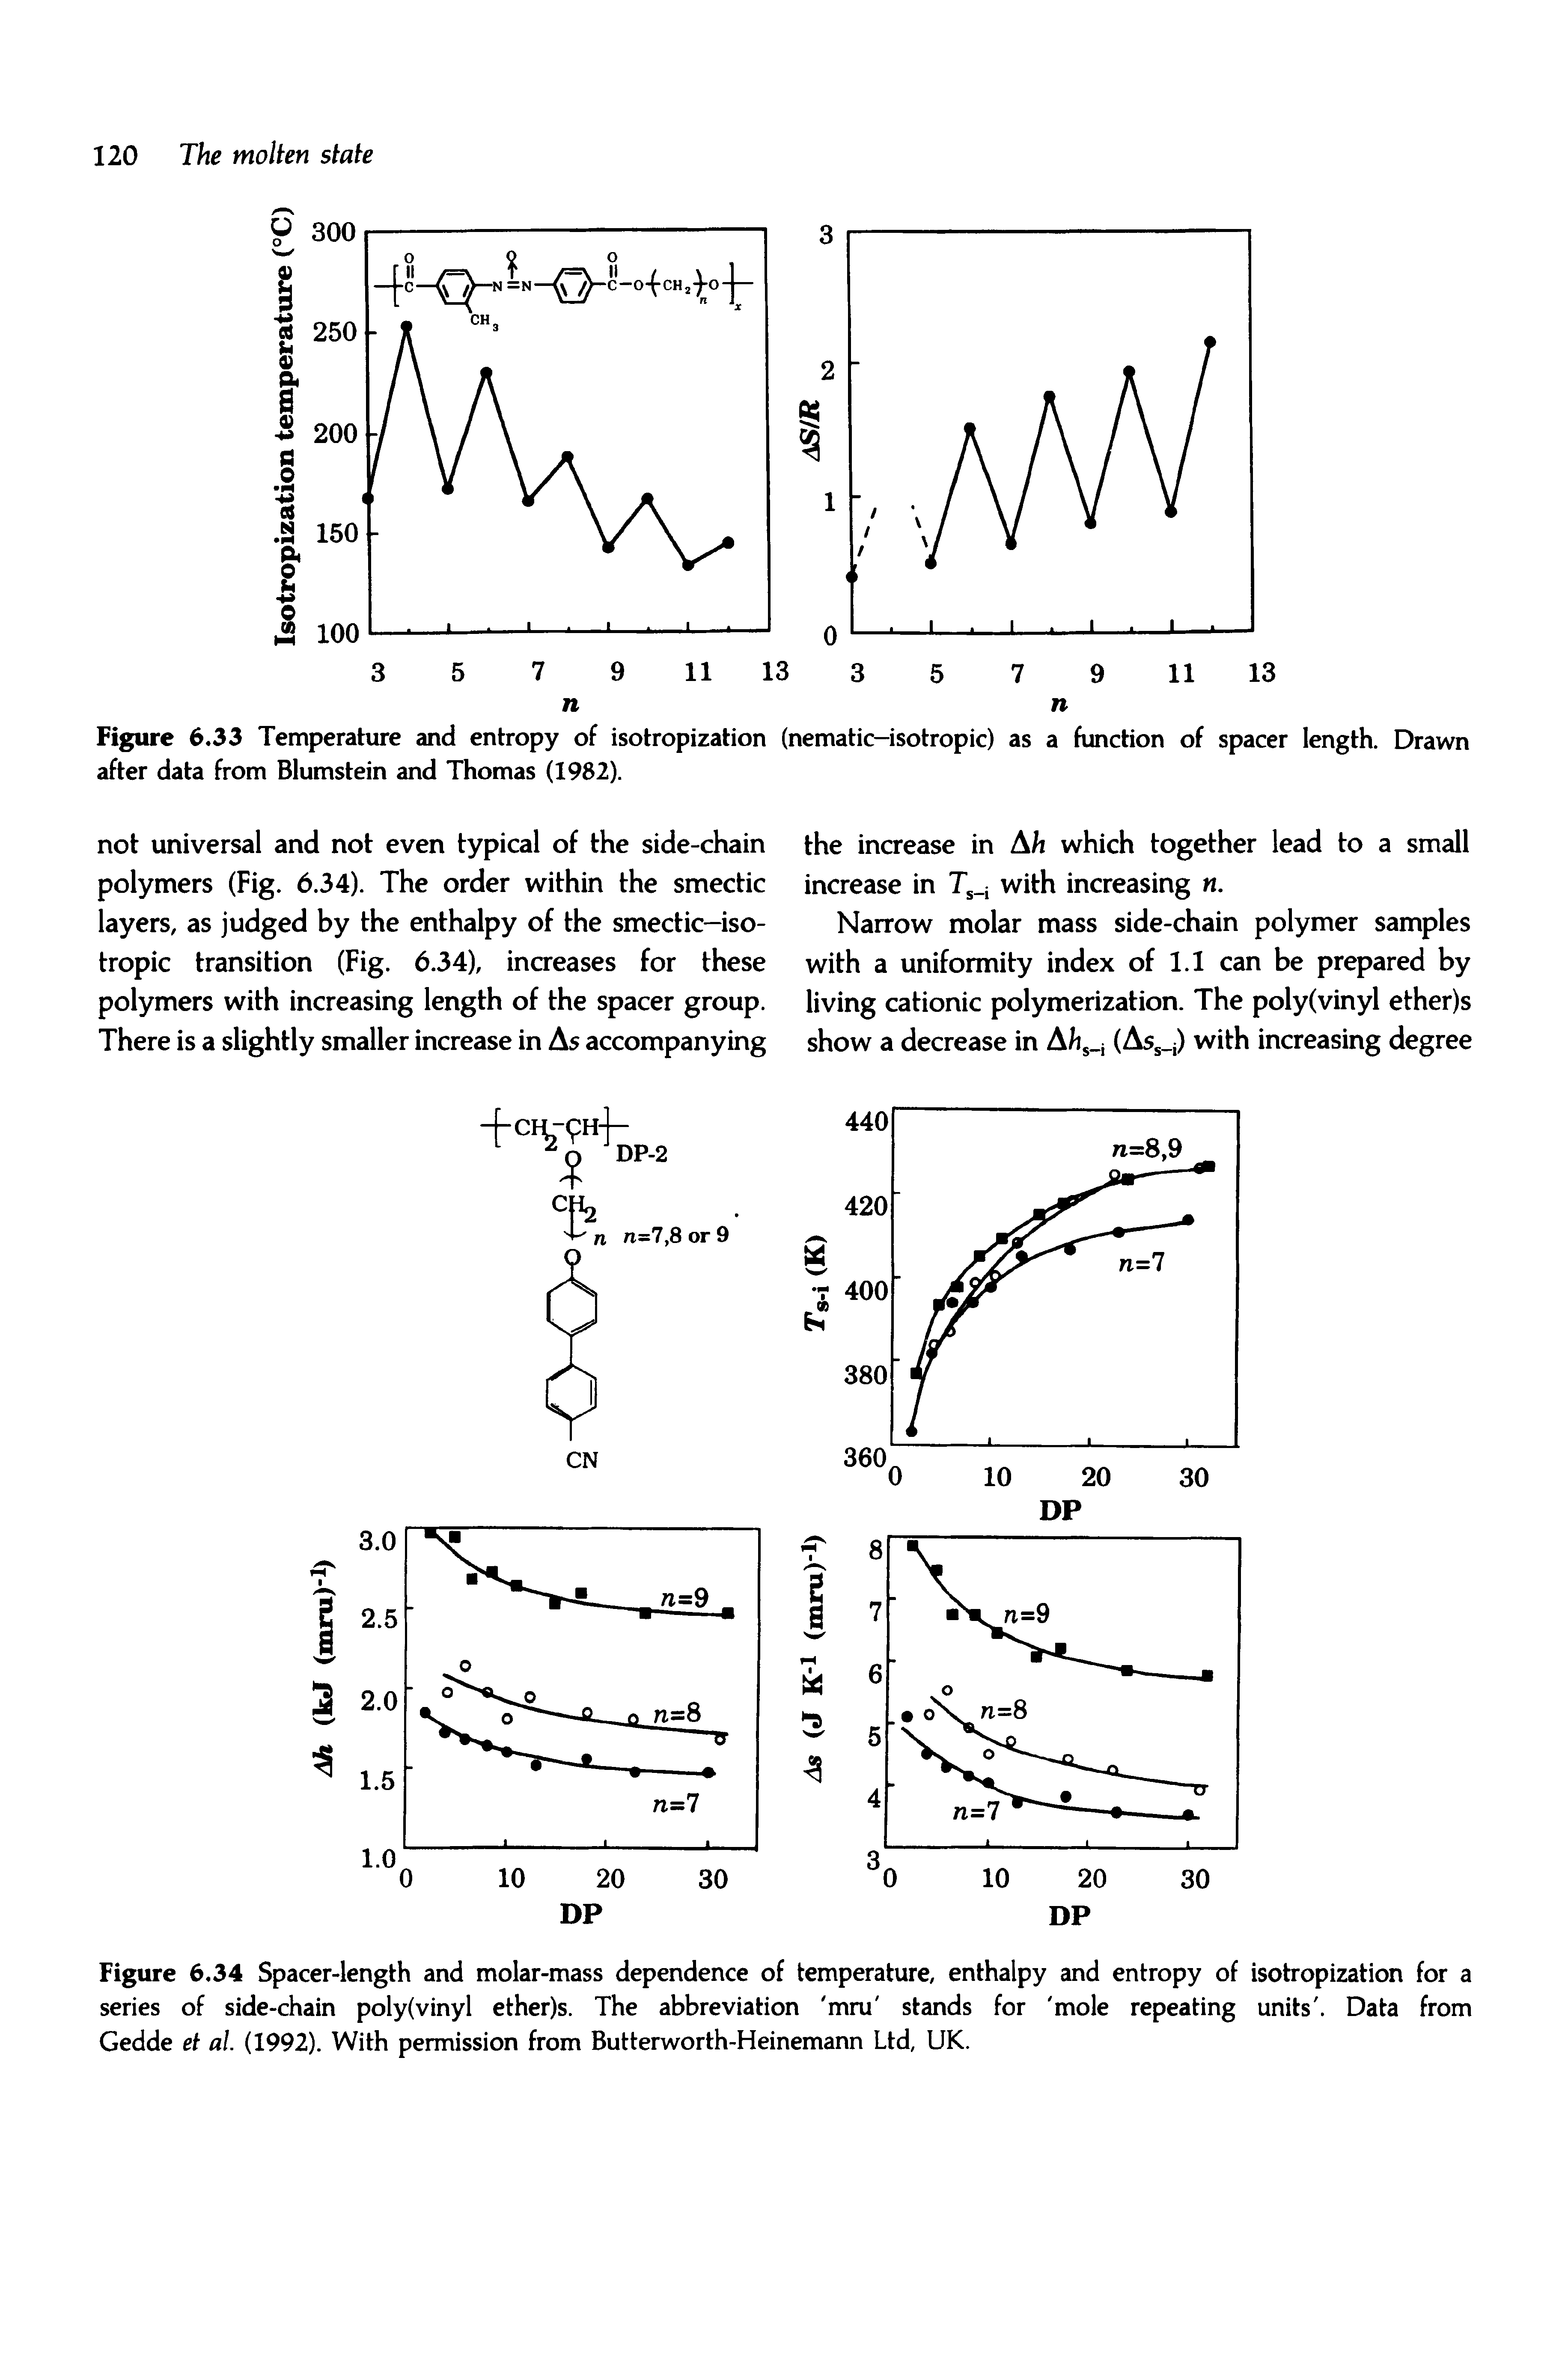 Figure 6,34 Spacer-length and molar-mass dependence of temperature, enthalpy and entropy of isotropization for a series of side-chain poly(vinyl ether)s. The abbreviation mru stands for mole repeating units. Data from Gedde et al. (1992). With permission from Butterworth-Heinemann Ltd, UK.